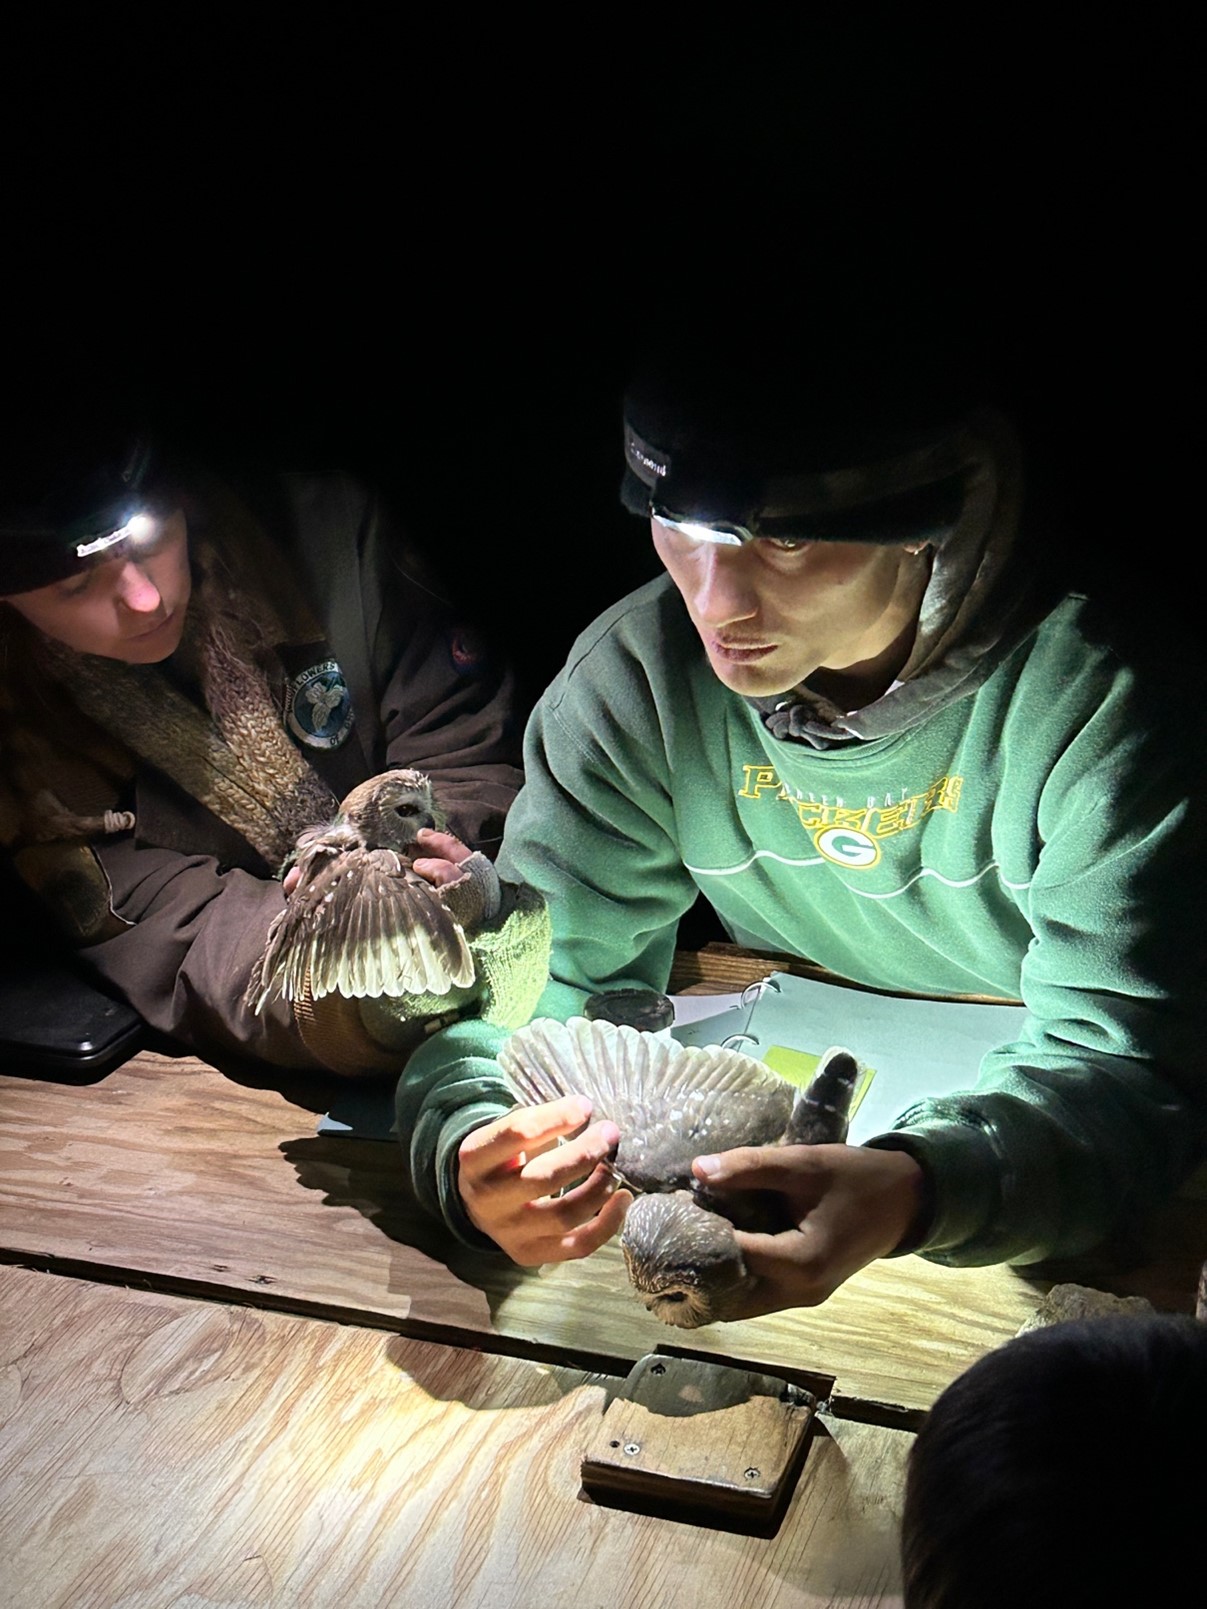 two scientists each hold a northern saw whet owl. They are holding the birds with wings outstretched to show their flight feathers. Both scientists are wearing headlamps and warm jackets